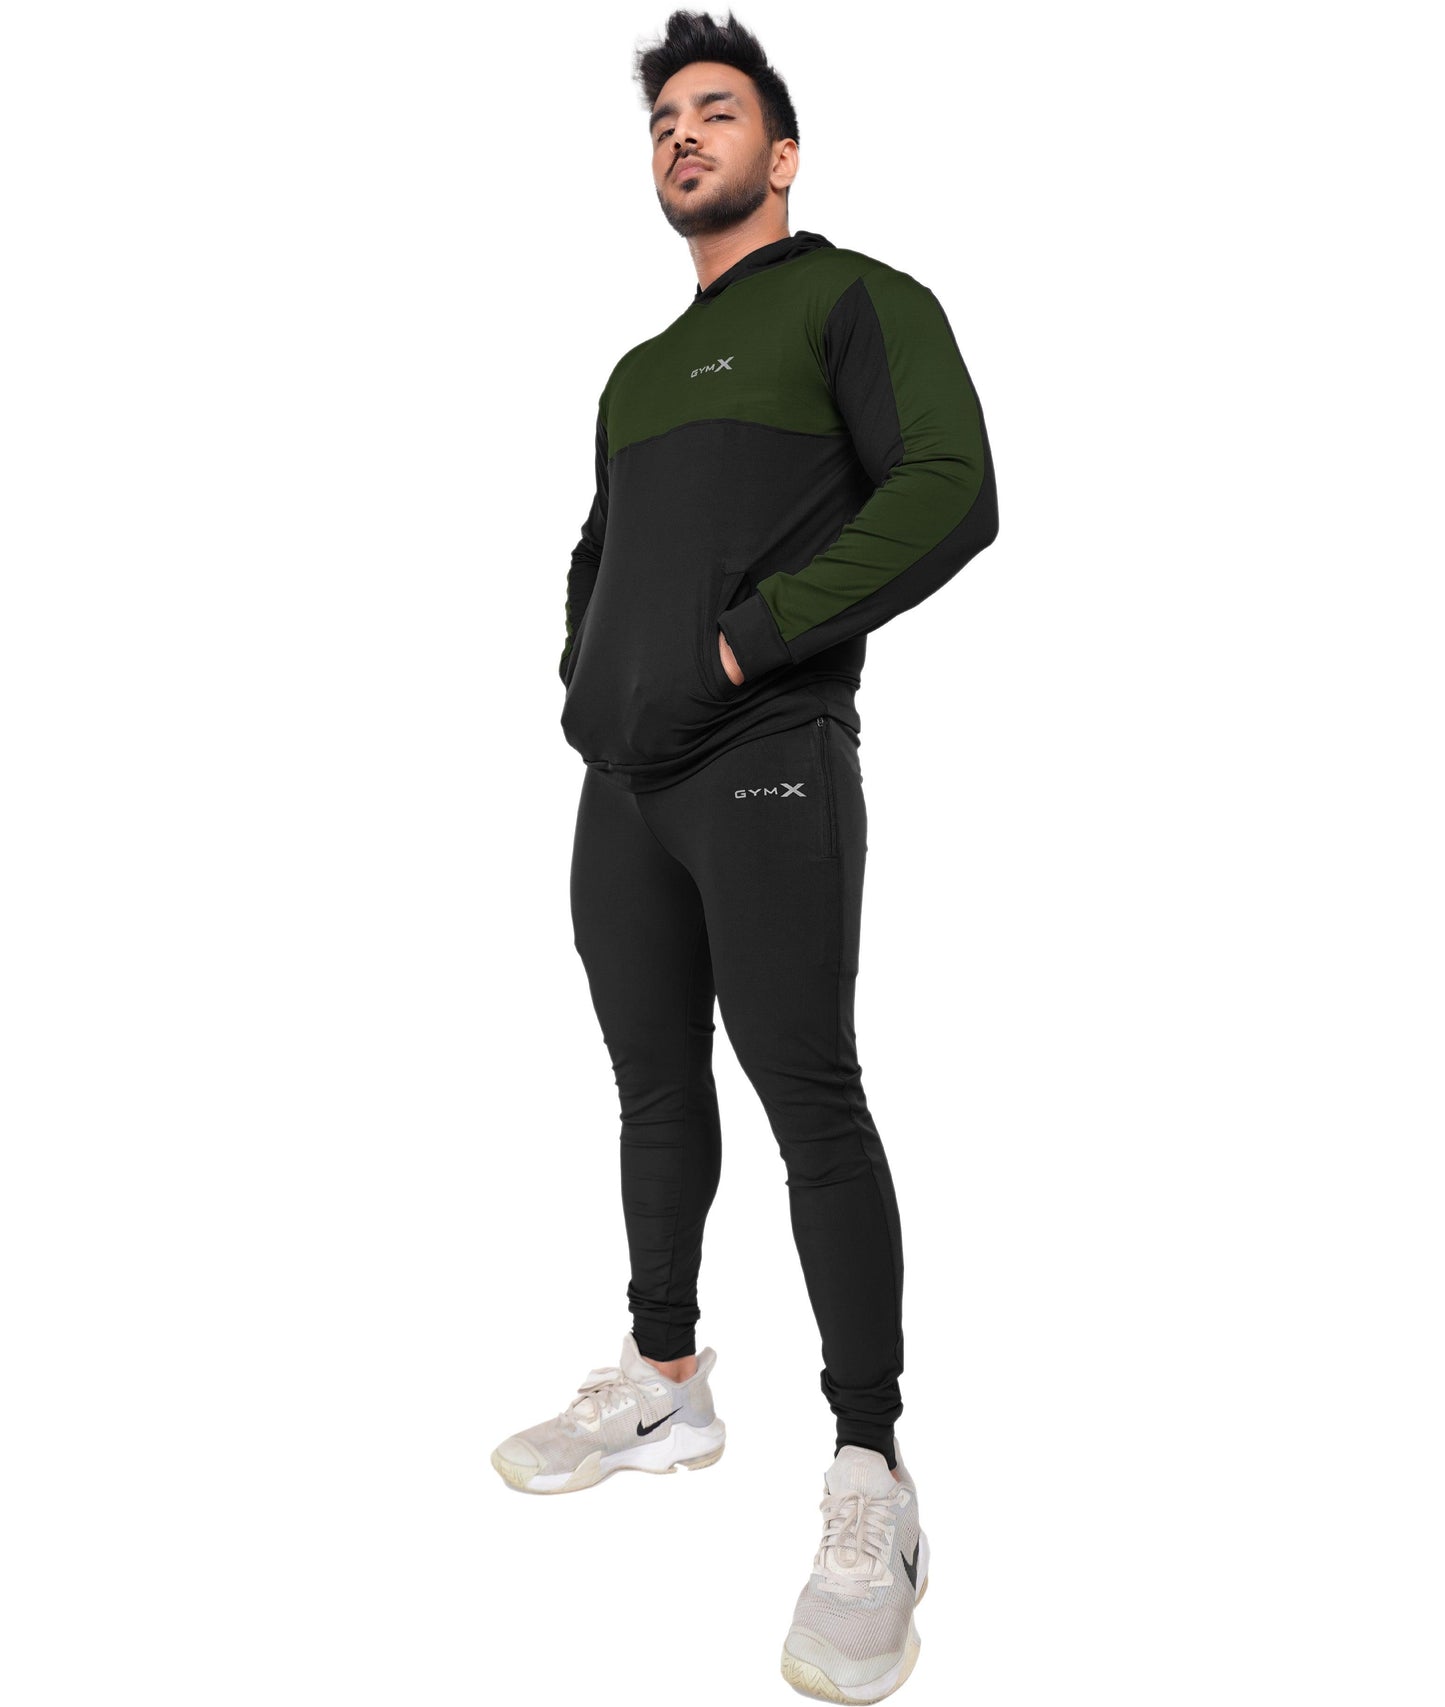 Dual Edition GymX Pullover: Lush Green-Sale